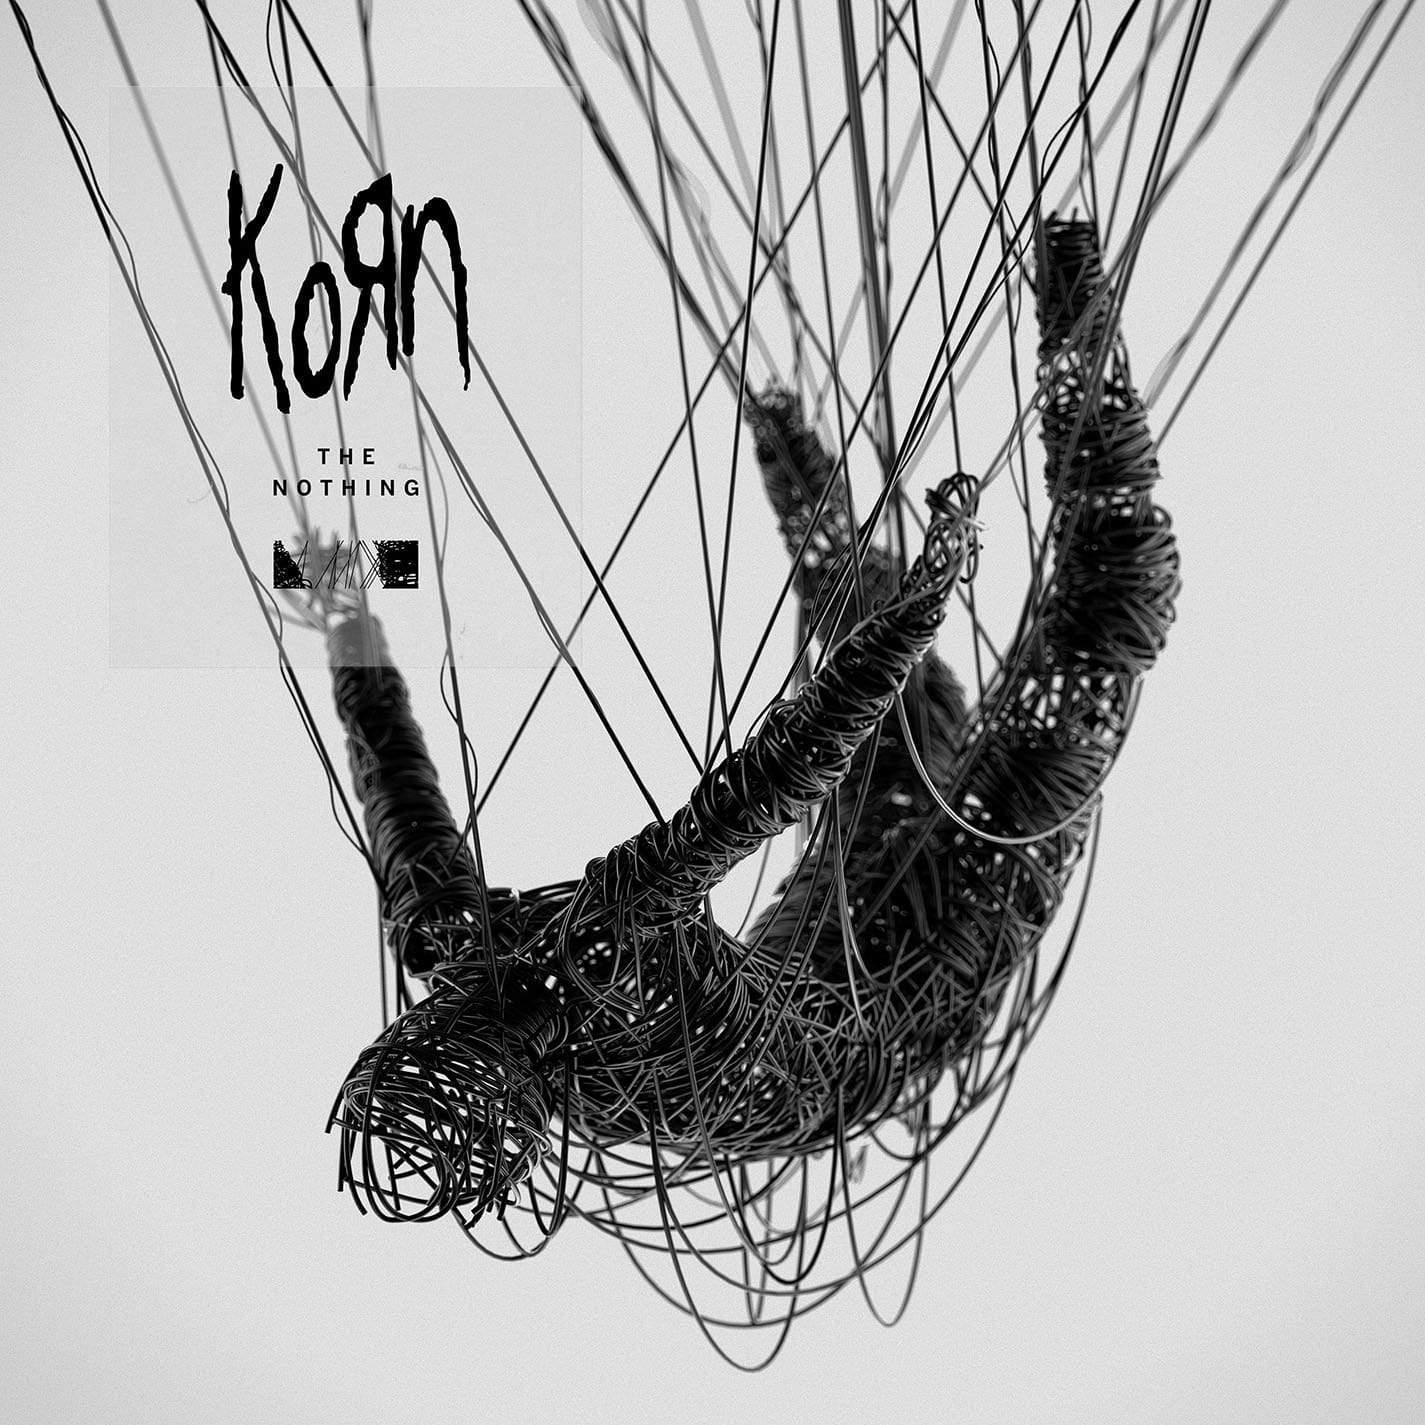 Korn - The Nothing (Limited Edition, White Vinyl) (LP) - Joco Records